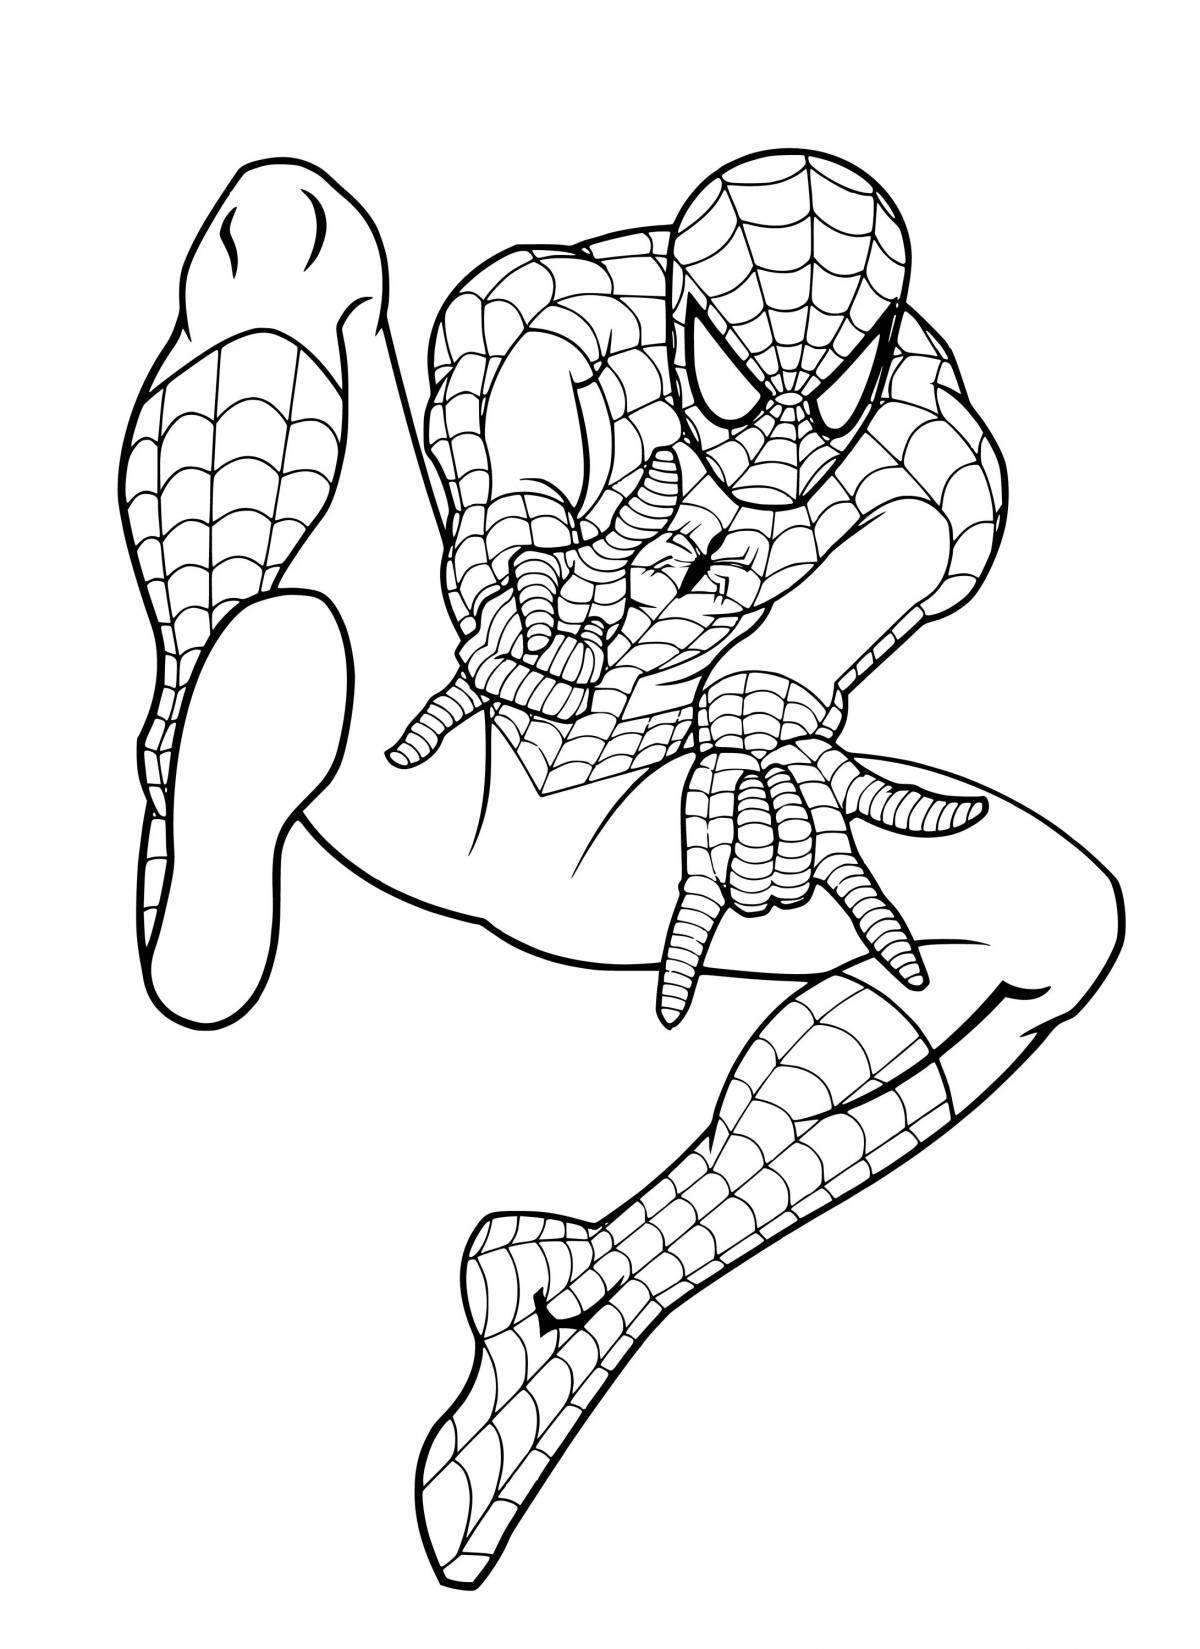 Exquisite spider-man coloring page